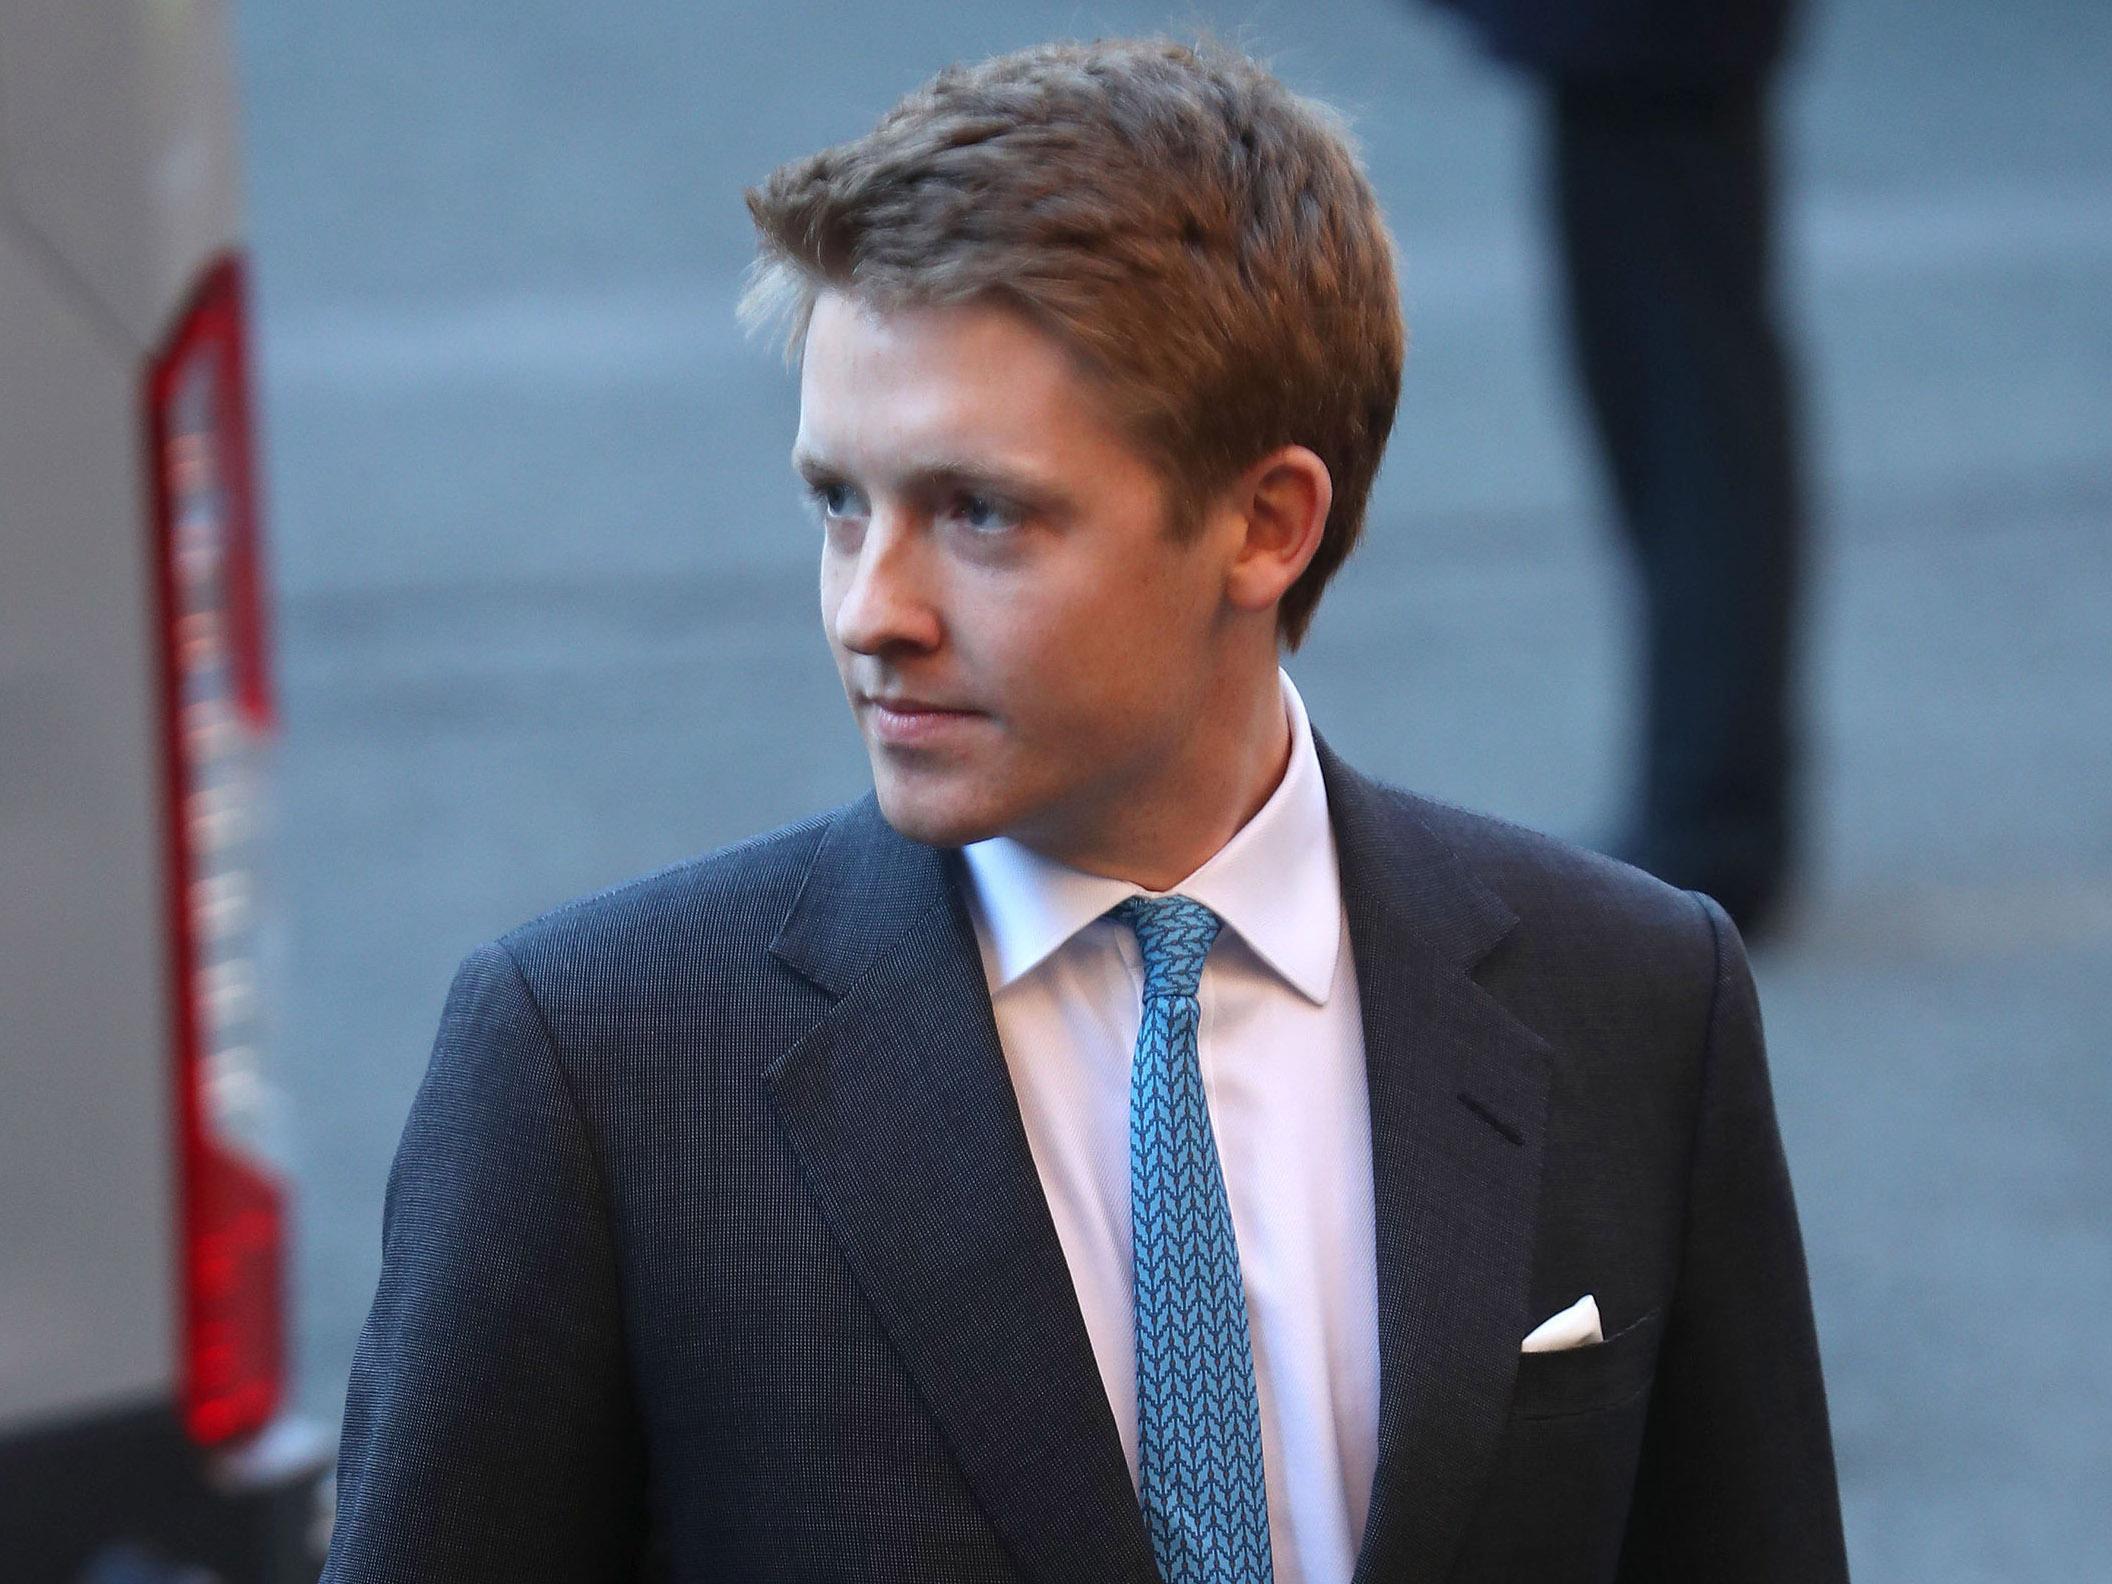 Hugh Grosvenor plans to leave London despite reportedly owning half of Mayfair